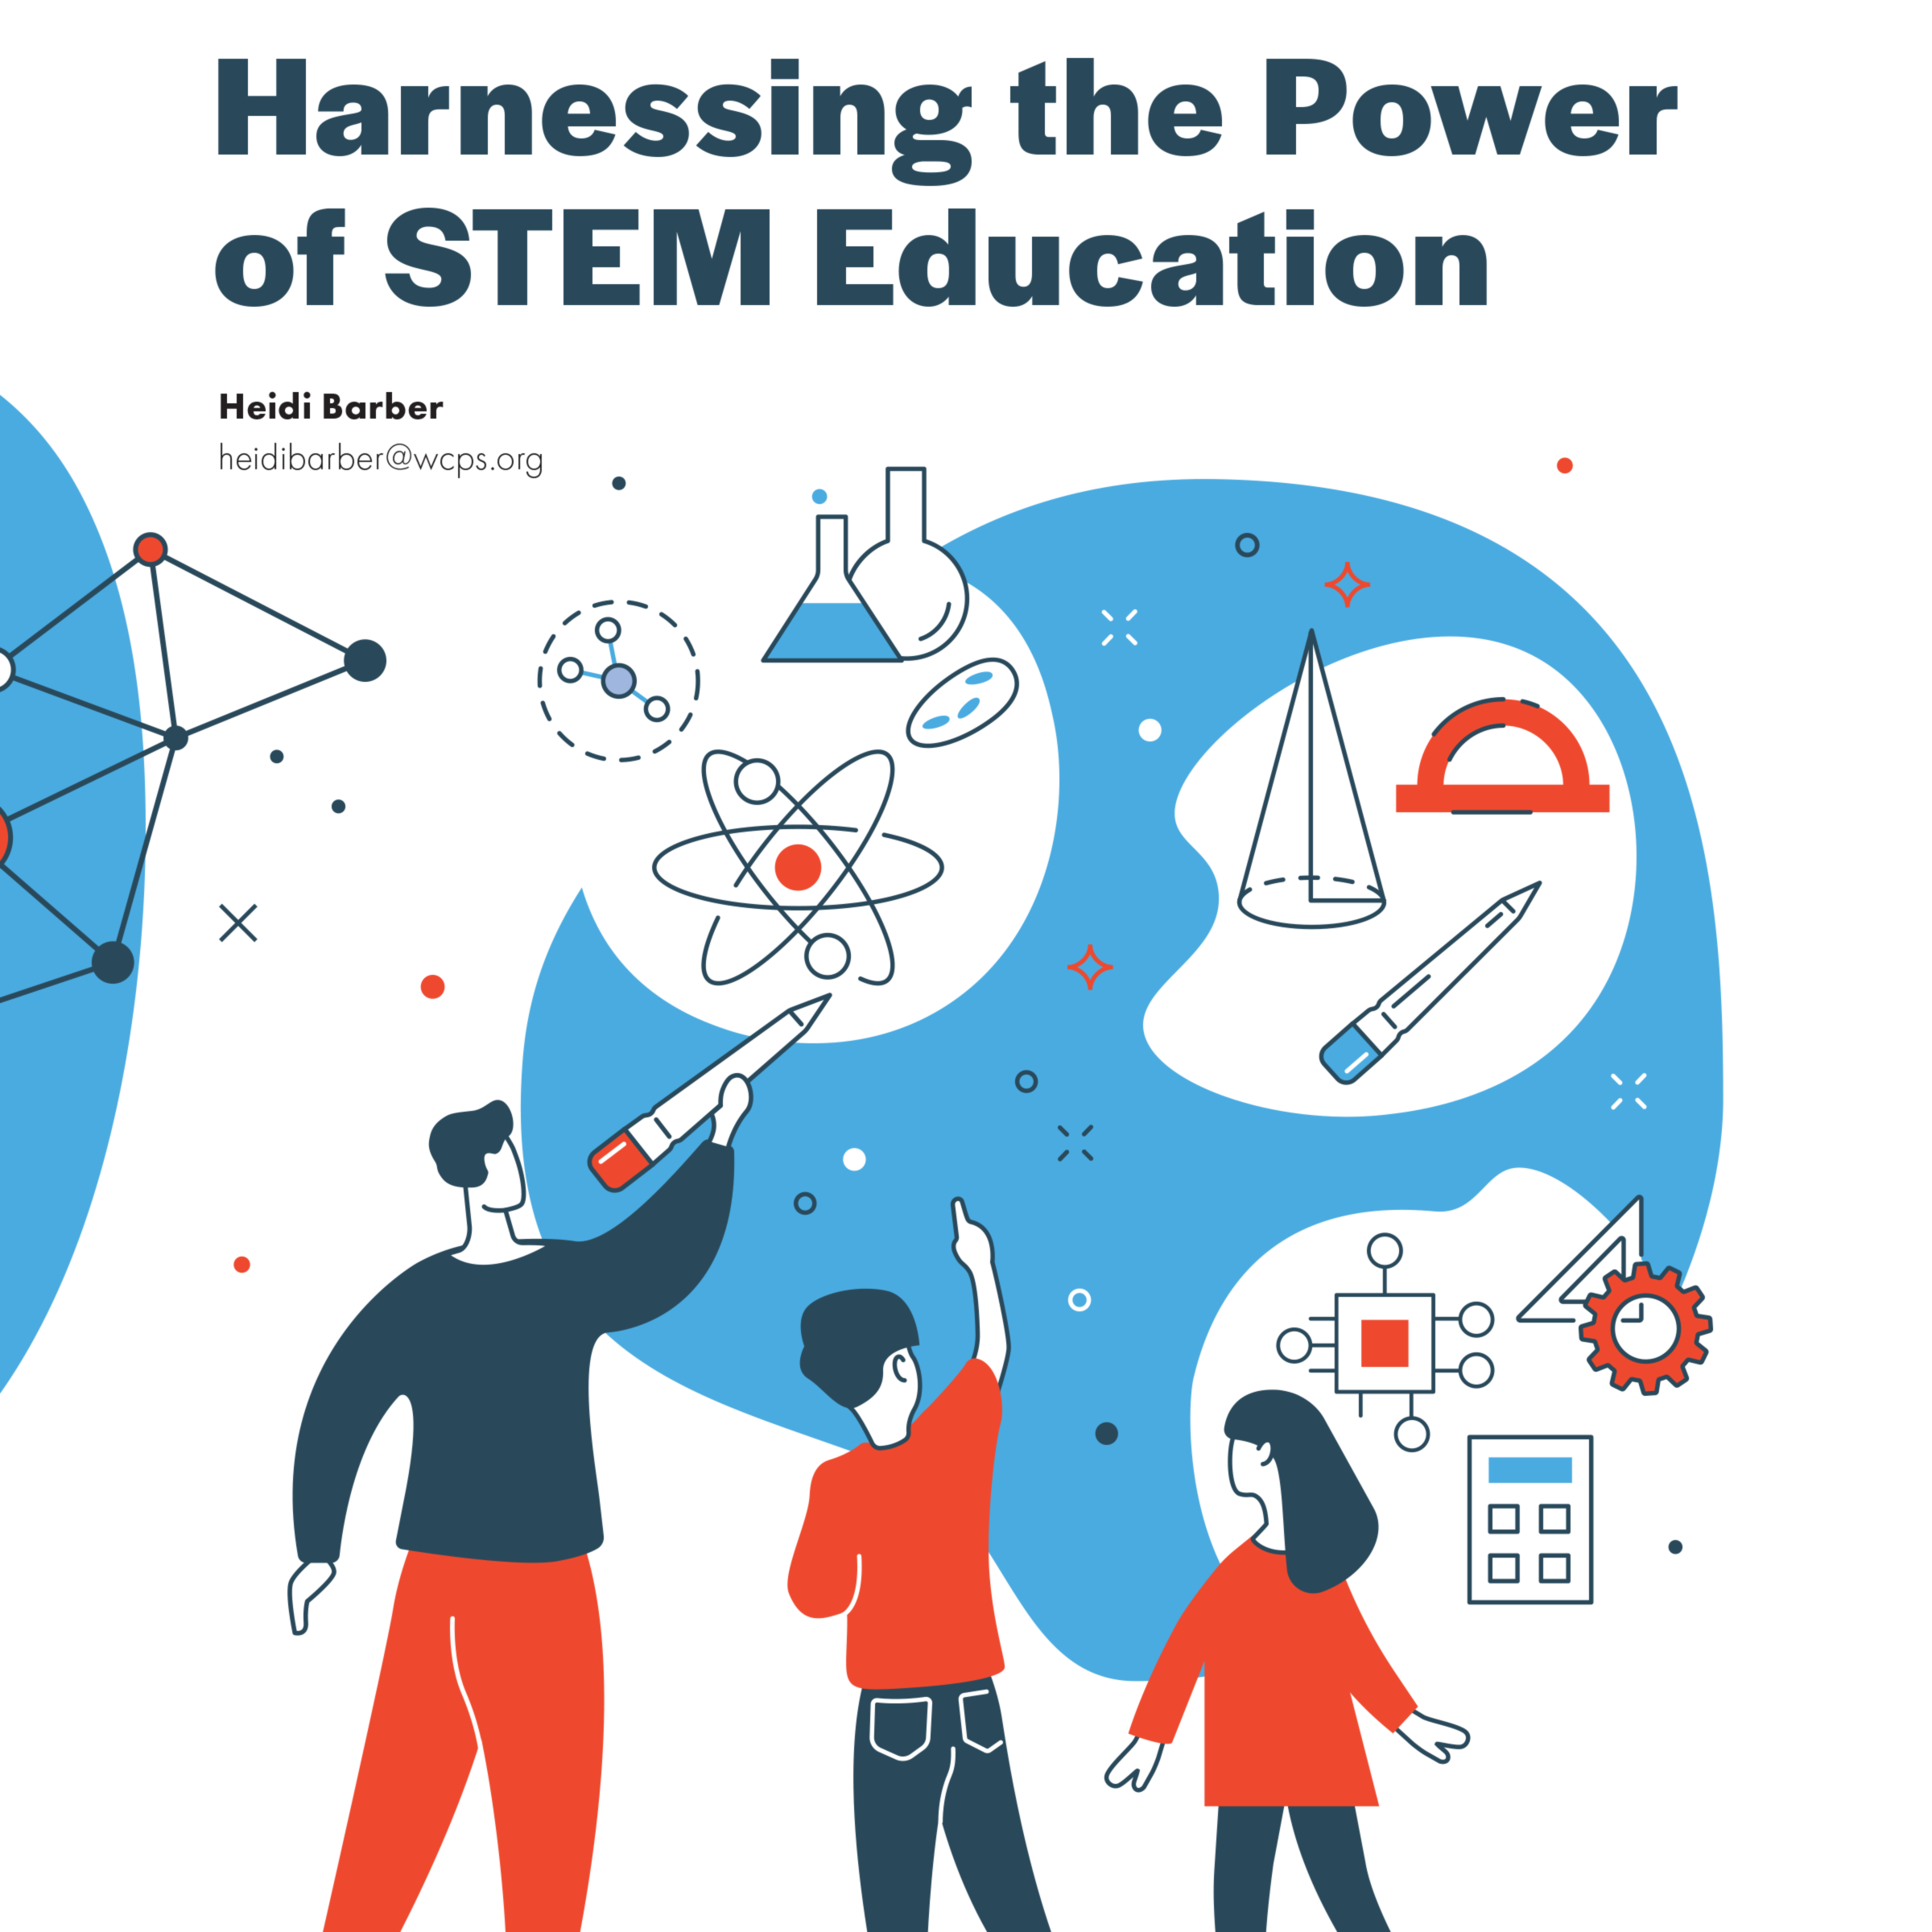 Harnessing the Power of STEM Education (Volume 50, No.5, pgs 48-53)